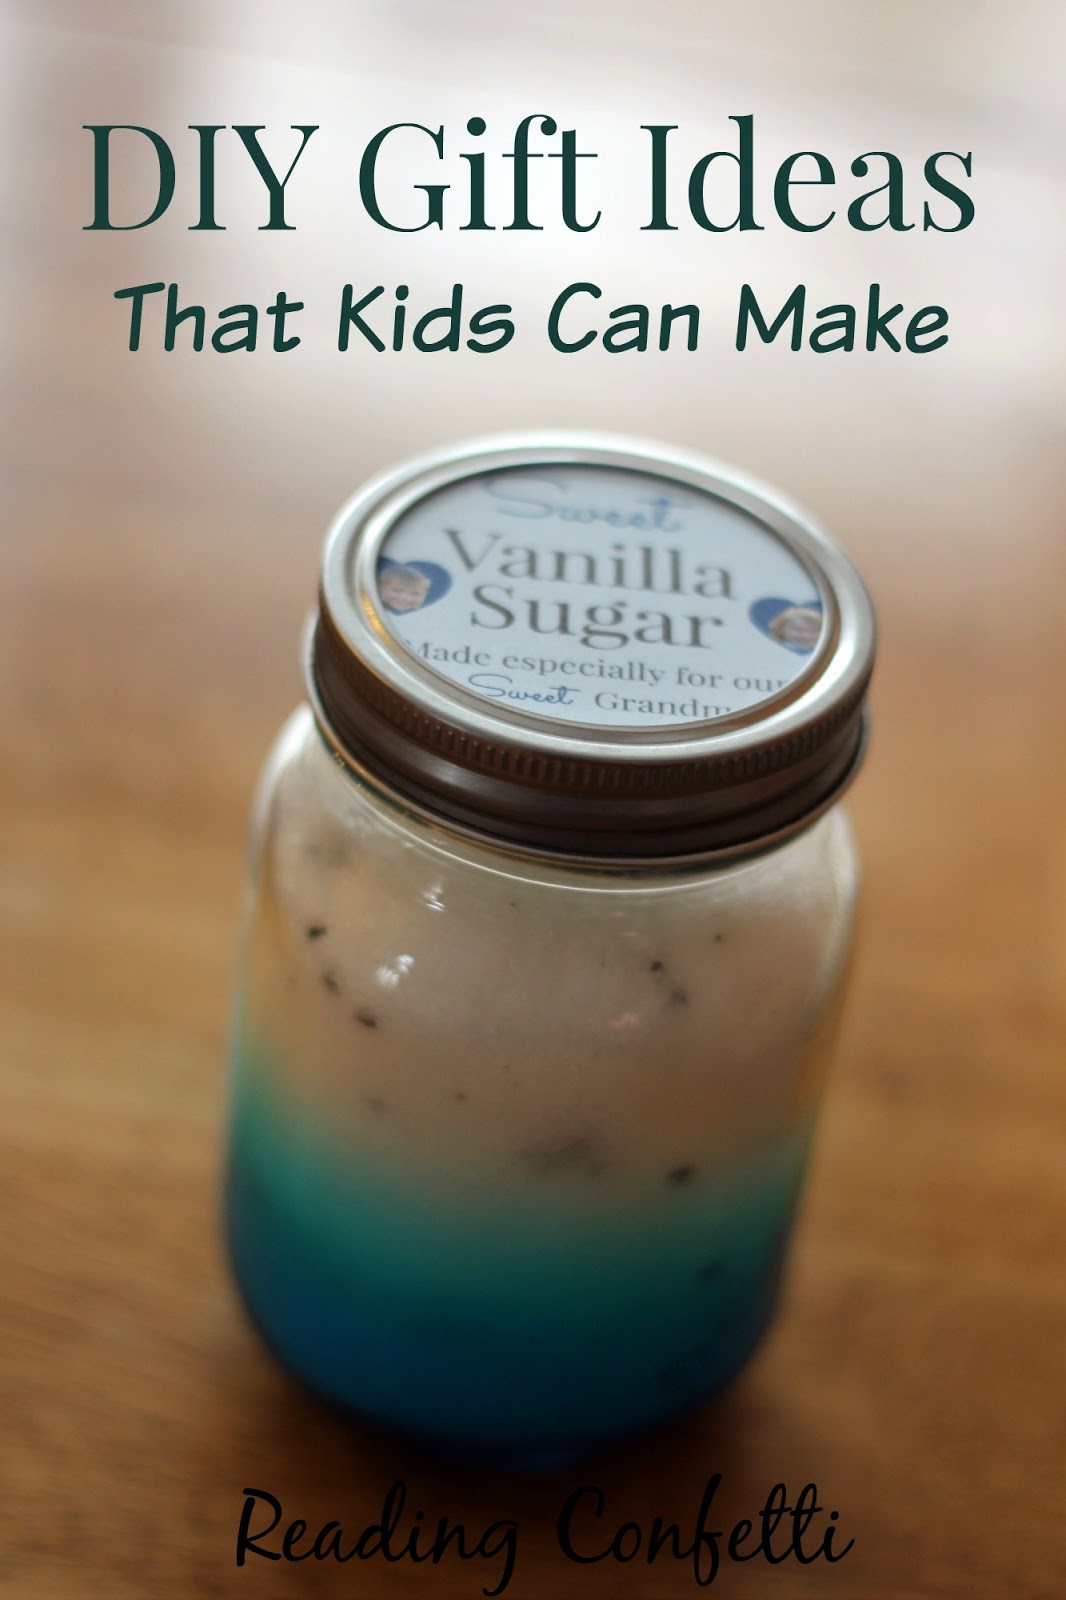 Lots of ideas for easy gifts that kids can make.